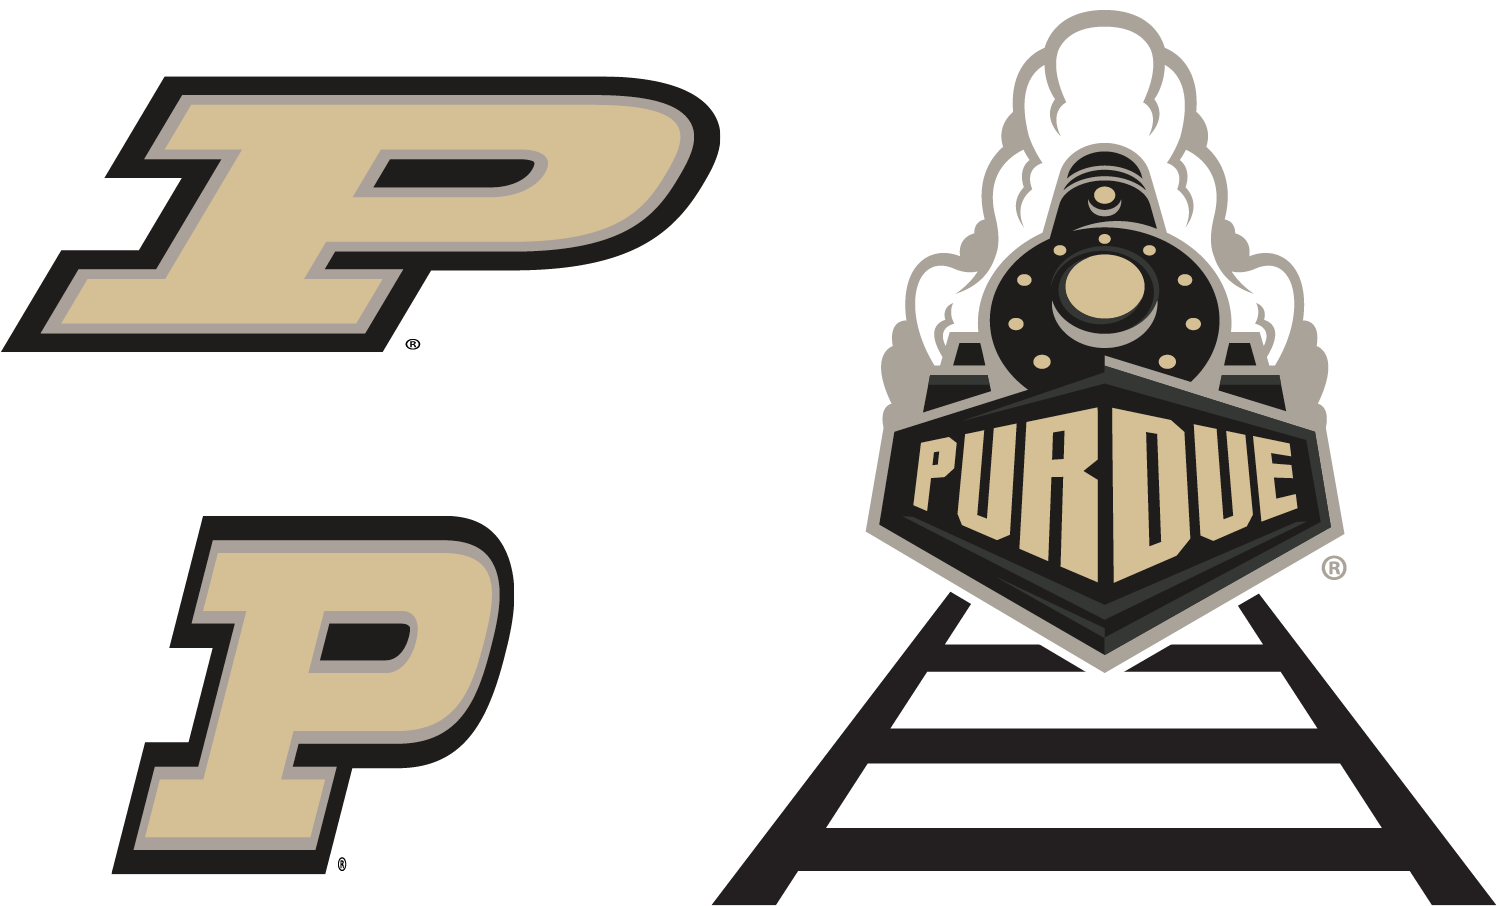 Example Showing How Not To Distort Or Combine Logos - 24 X 8 Purdue Tire Cover (1771x1188)